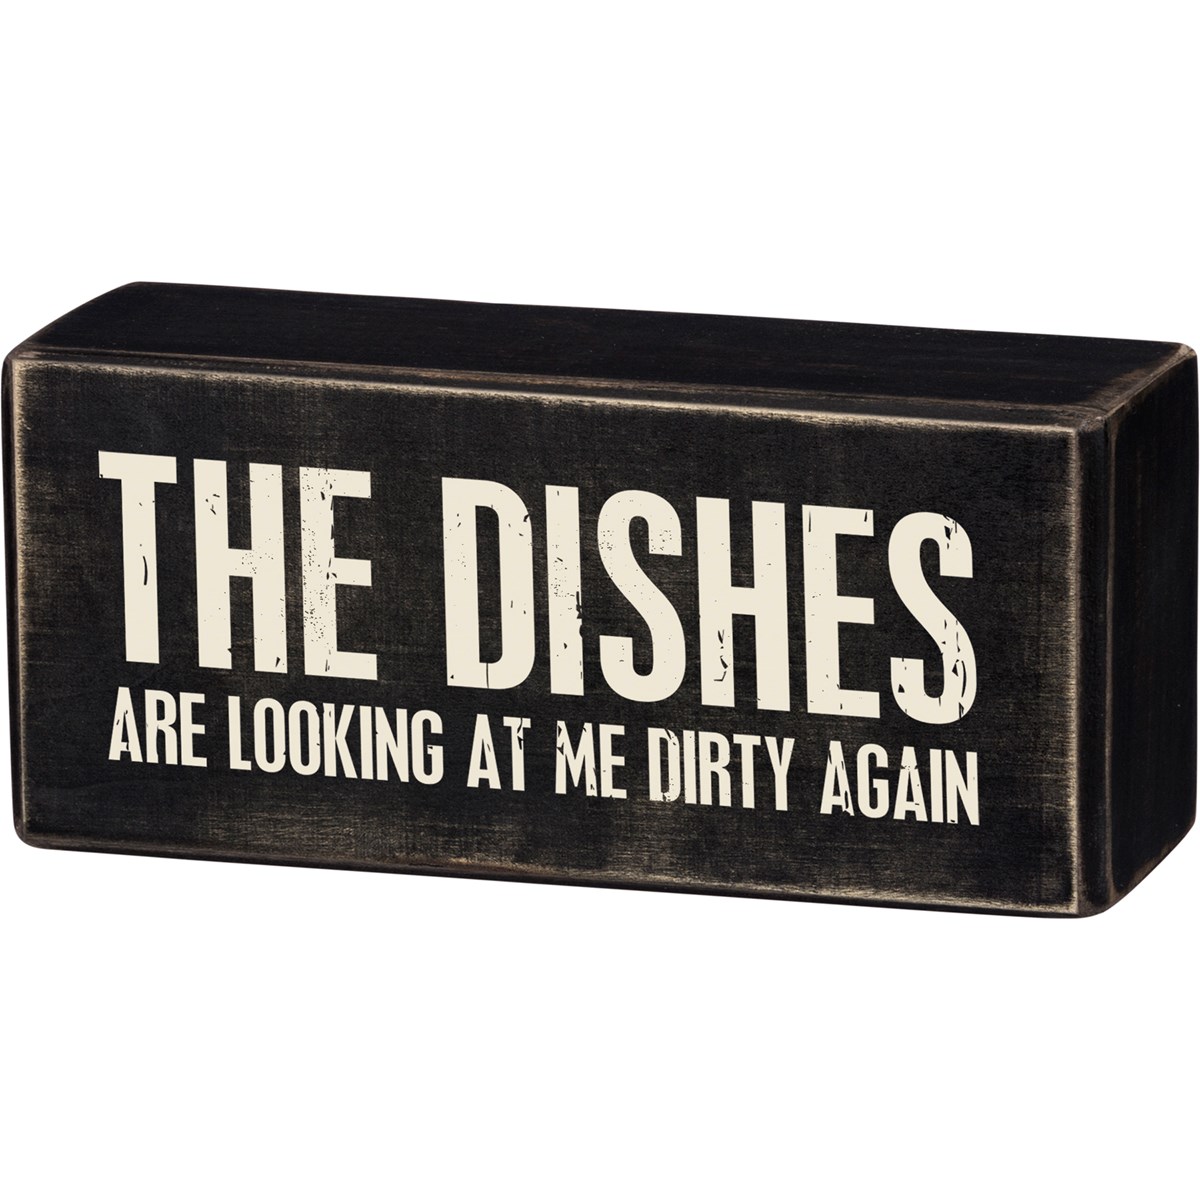 Dishes Are Looking At Me Dirty Again Box Sign - Wood